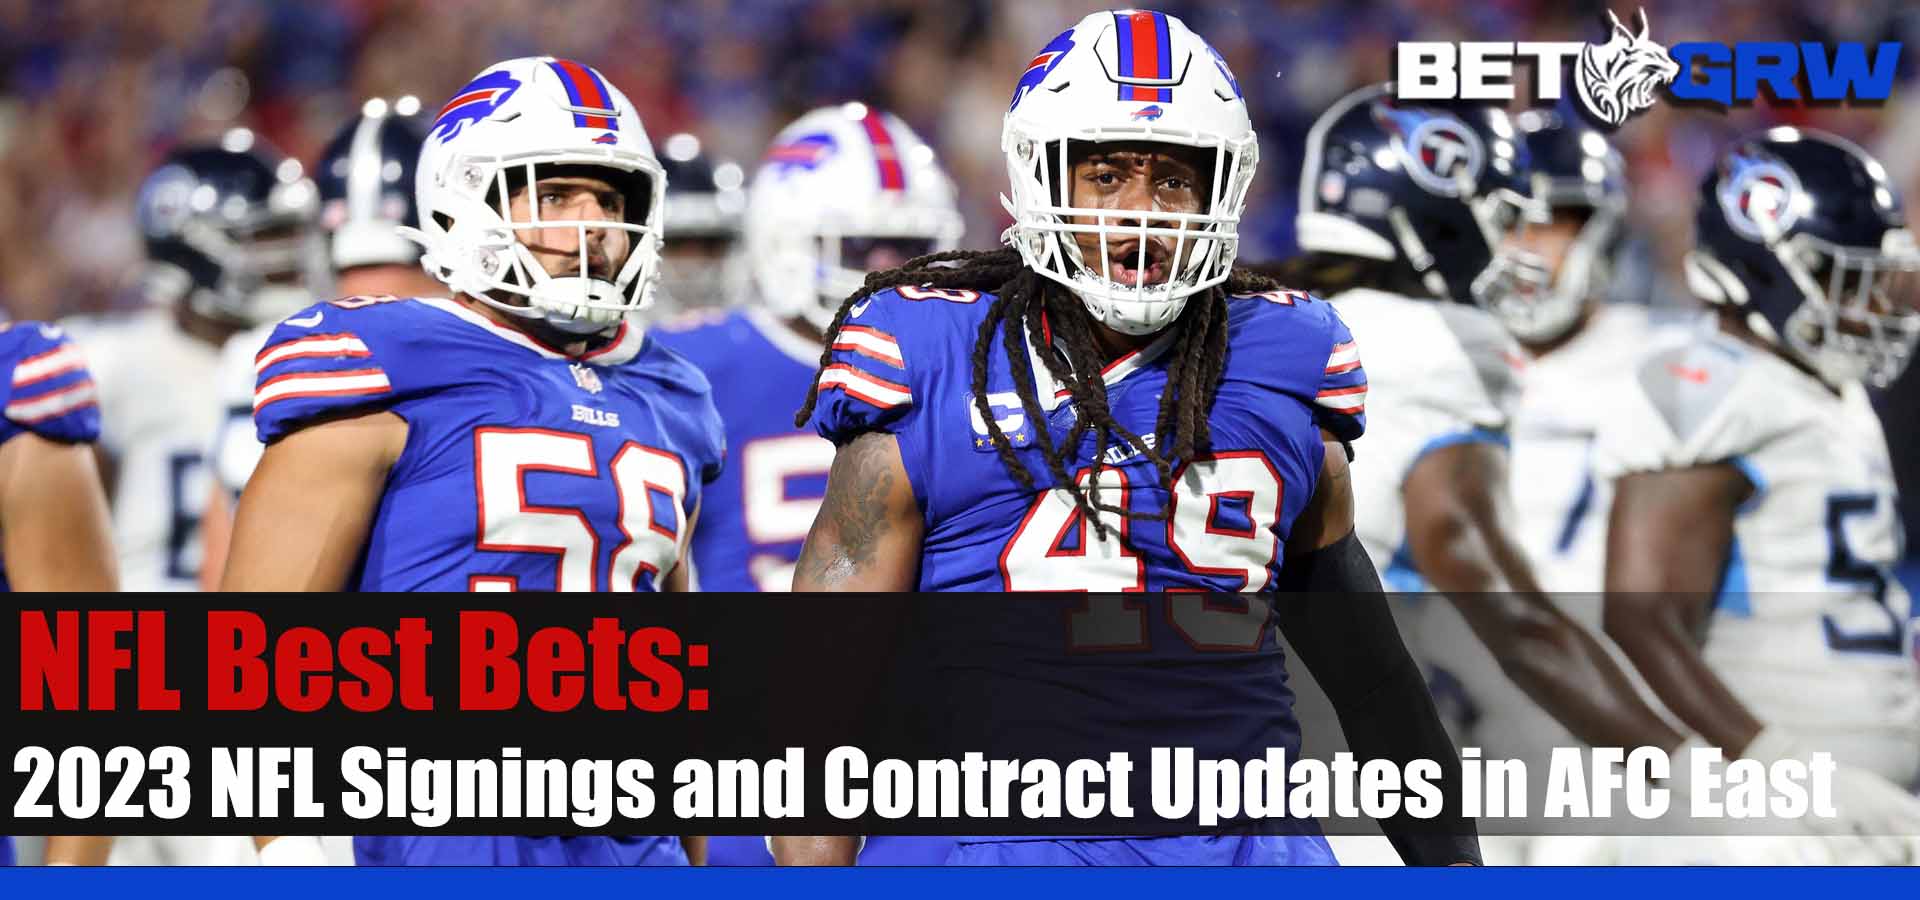 2023 NFL Signings and Contract Updates in AFC East